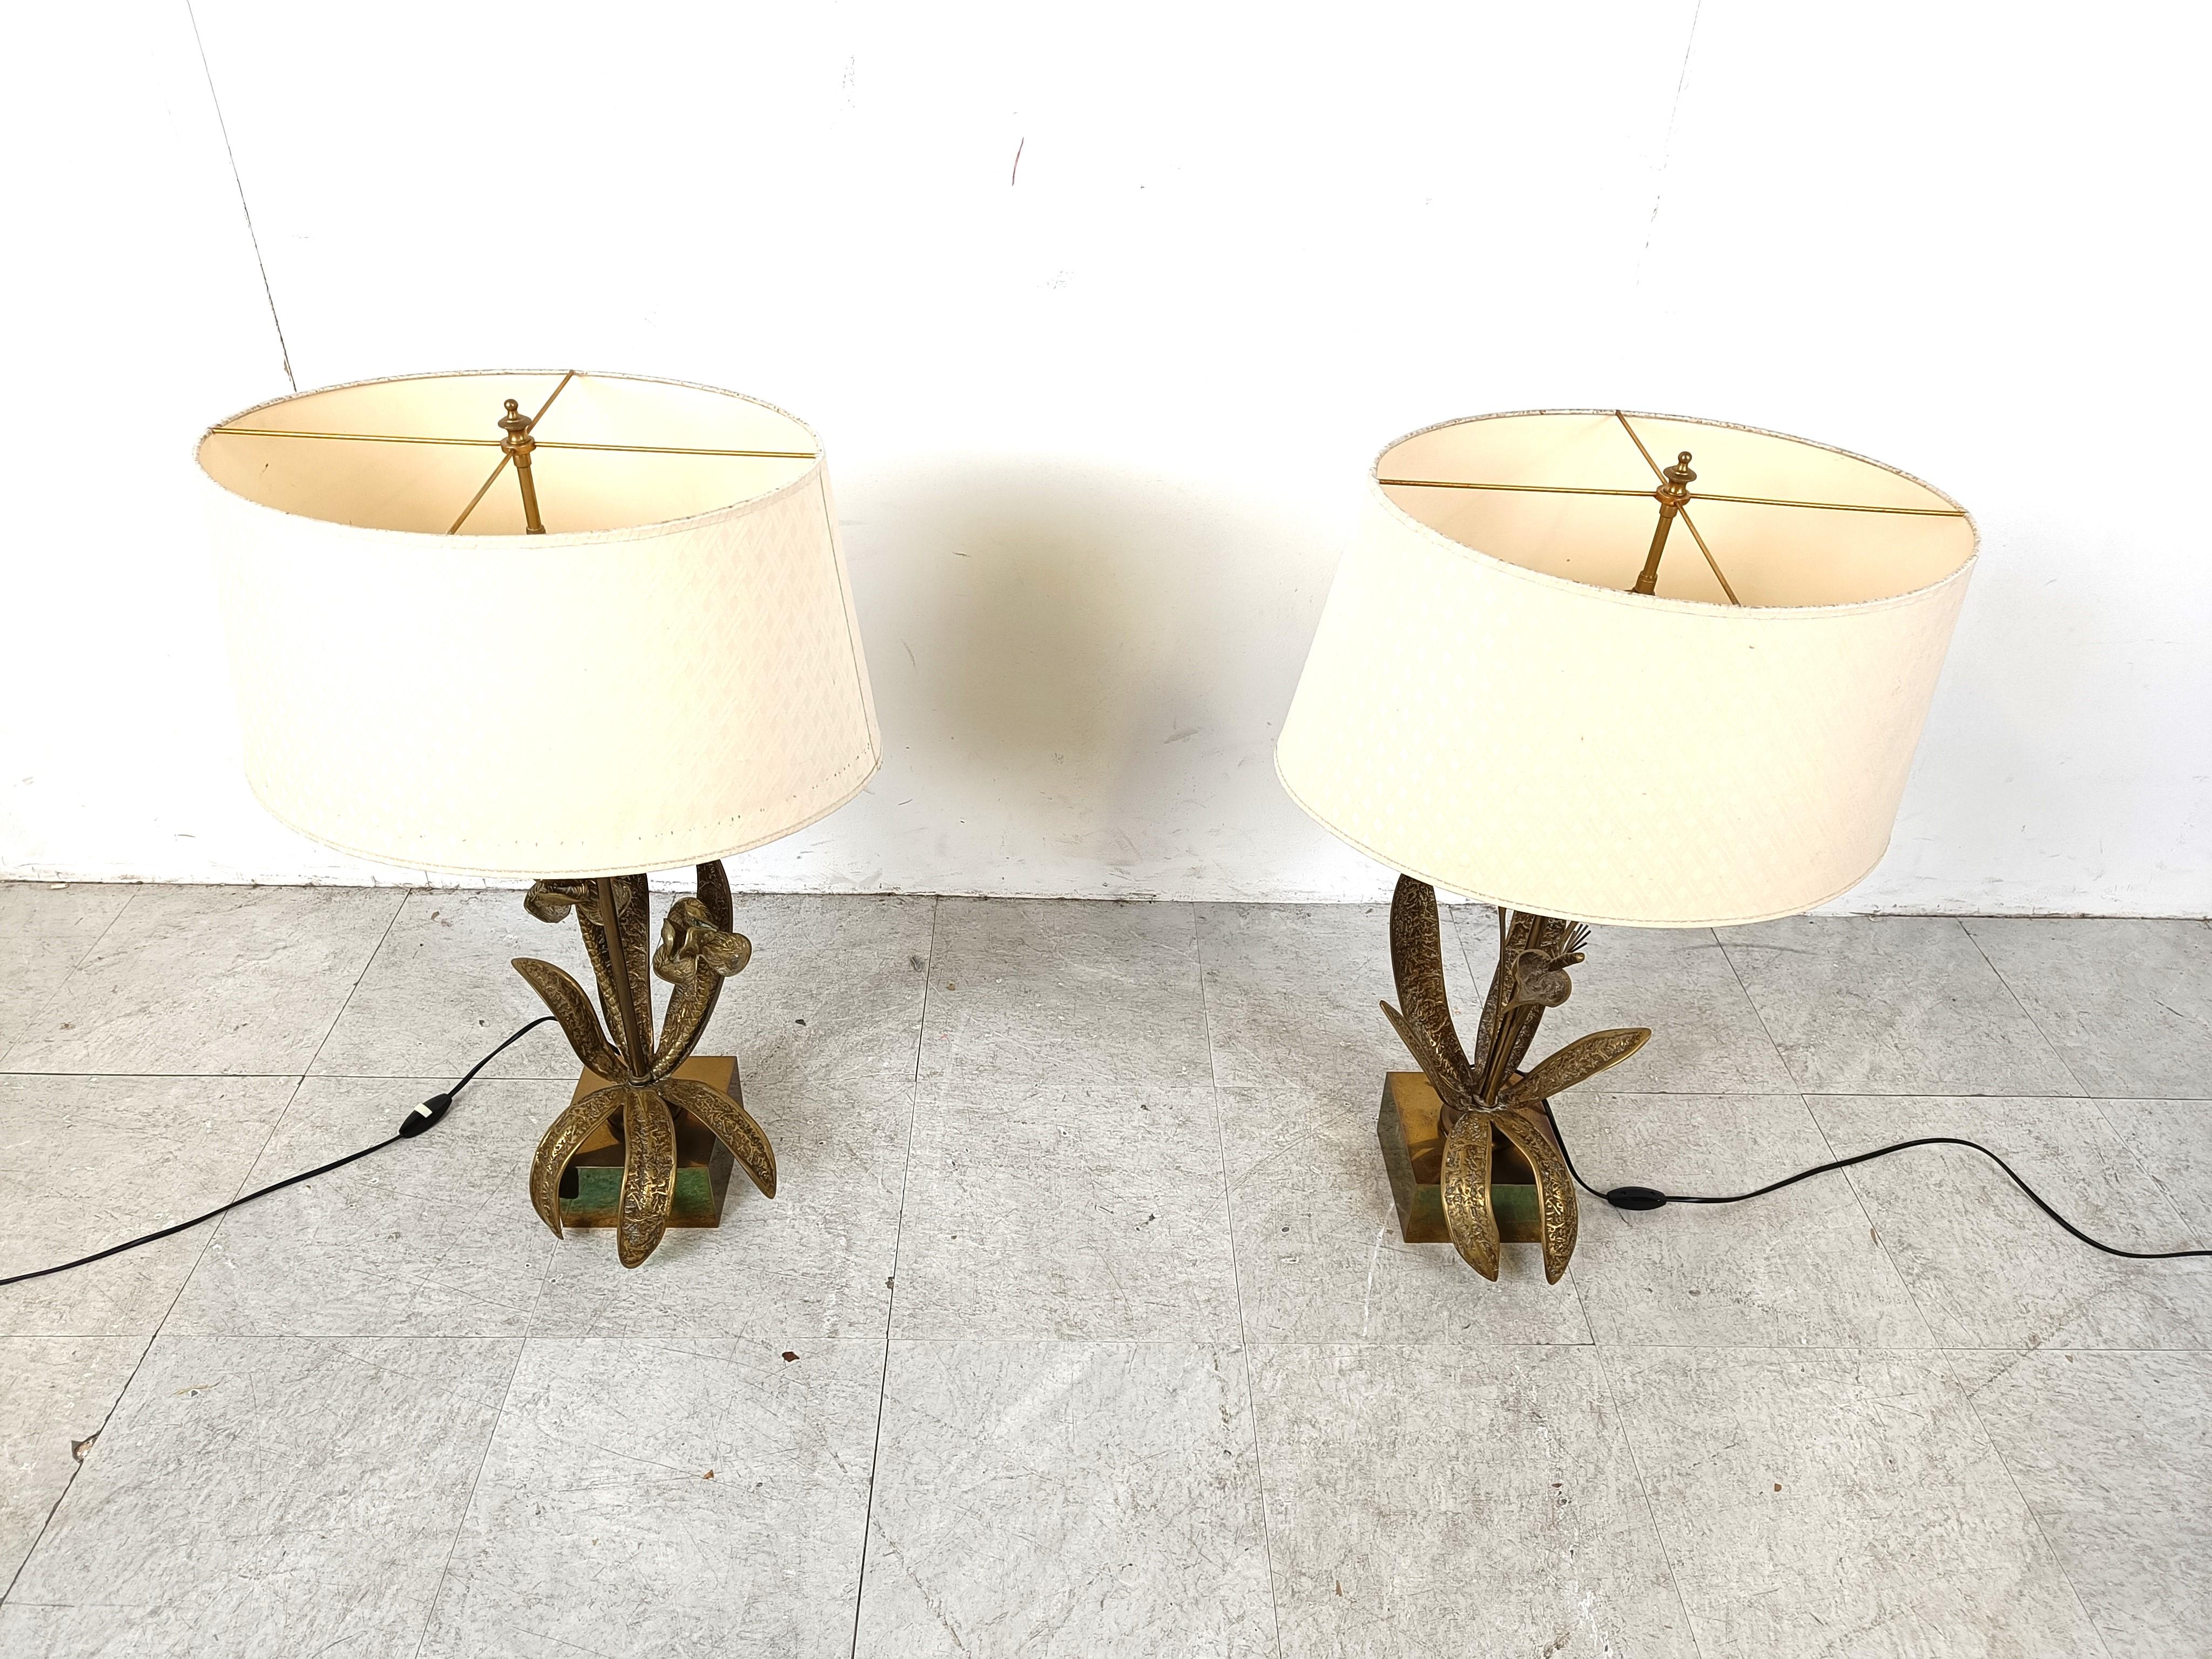 Vintage sculptural bronze flower lamps mounted on a brass base.

Come with the original lamp shades.

Beautiful original condition

The lamp has been sculpted with eye for detail just like the stunning maison charles lamps.

Works with regular